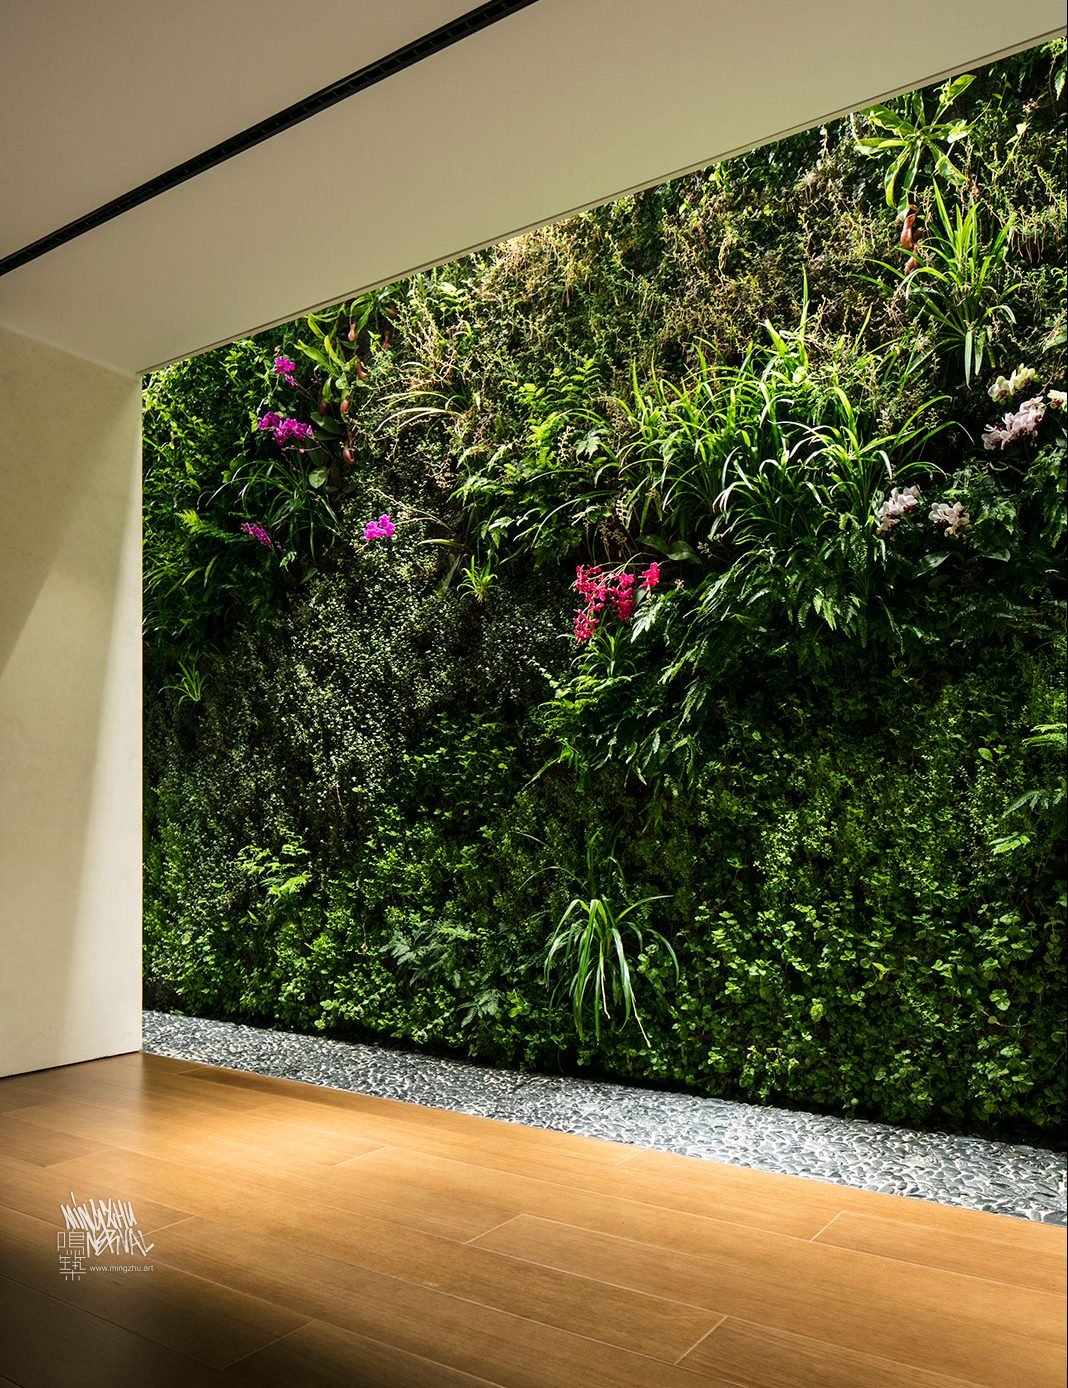 At Mingzhu Nerval, we thrive at creating the most beautiful vertical gardens in the world. For this villa, we created a peaceful yoga room design – Hong Kong, 2016.